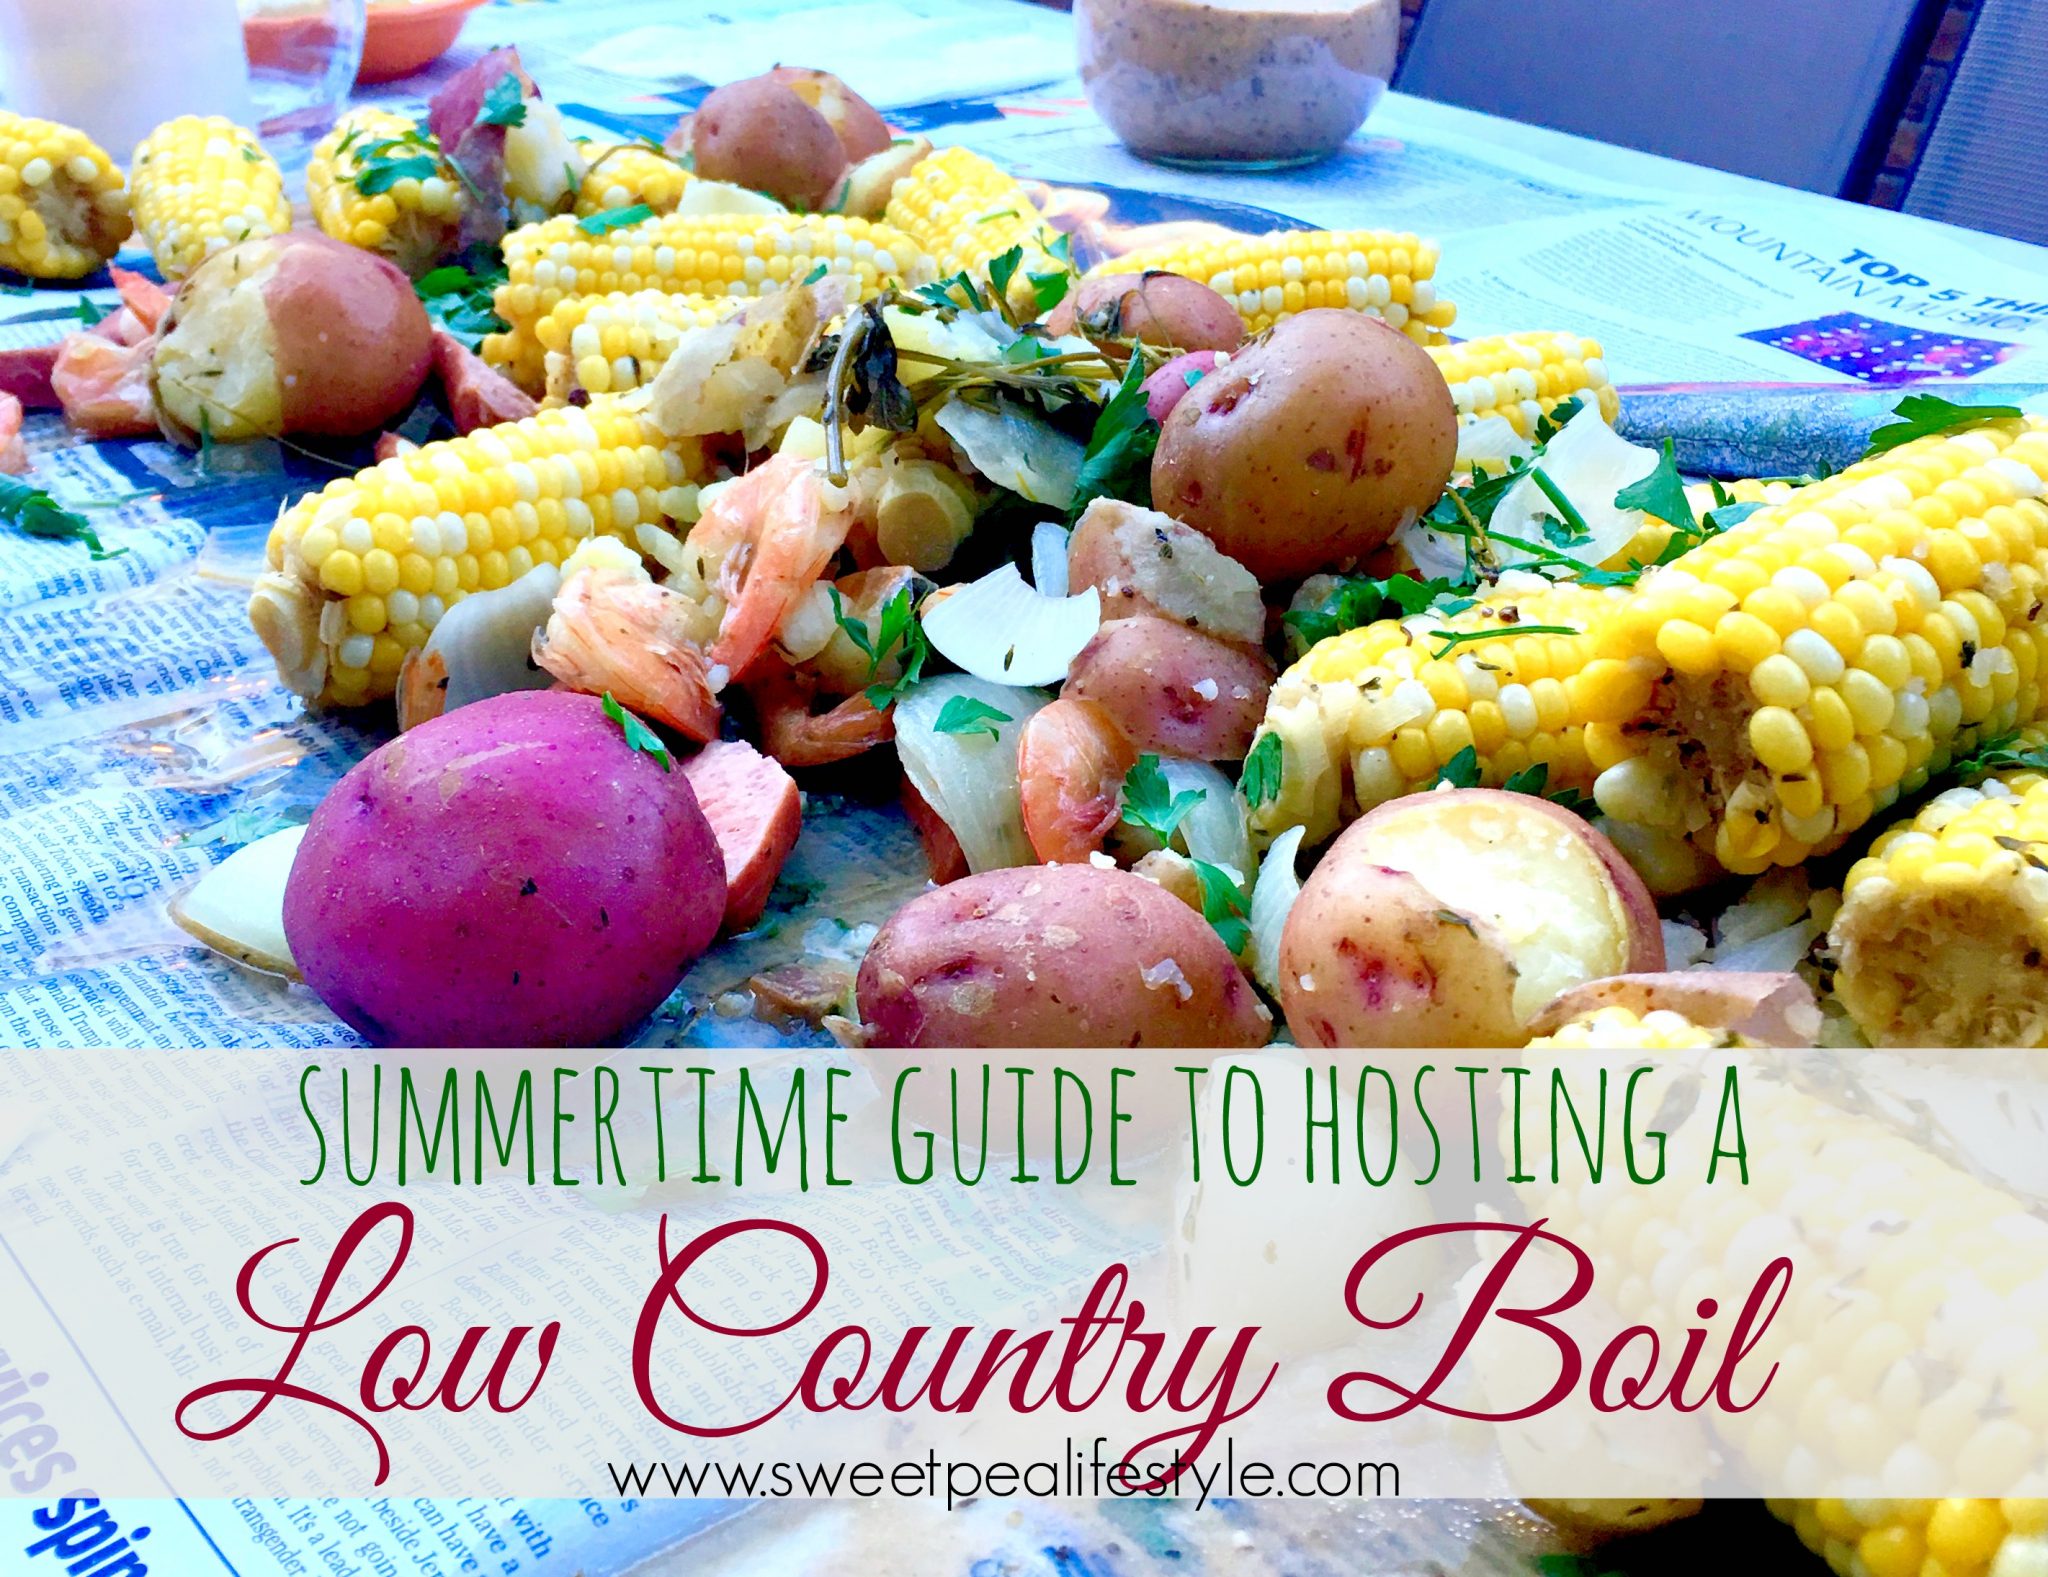 Summertime Guide to Hosting a Low Country Boil